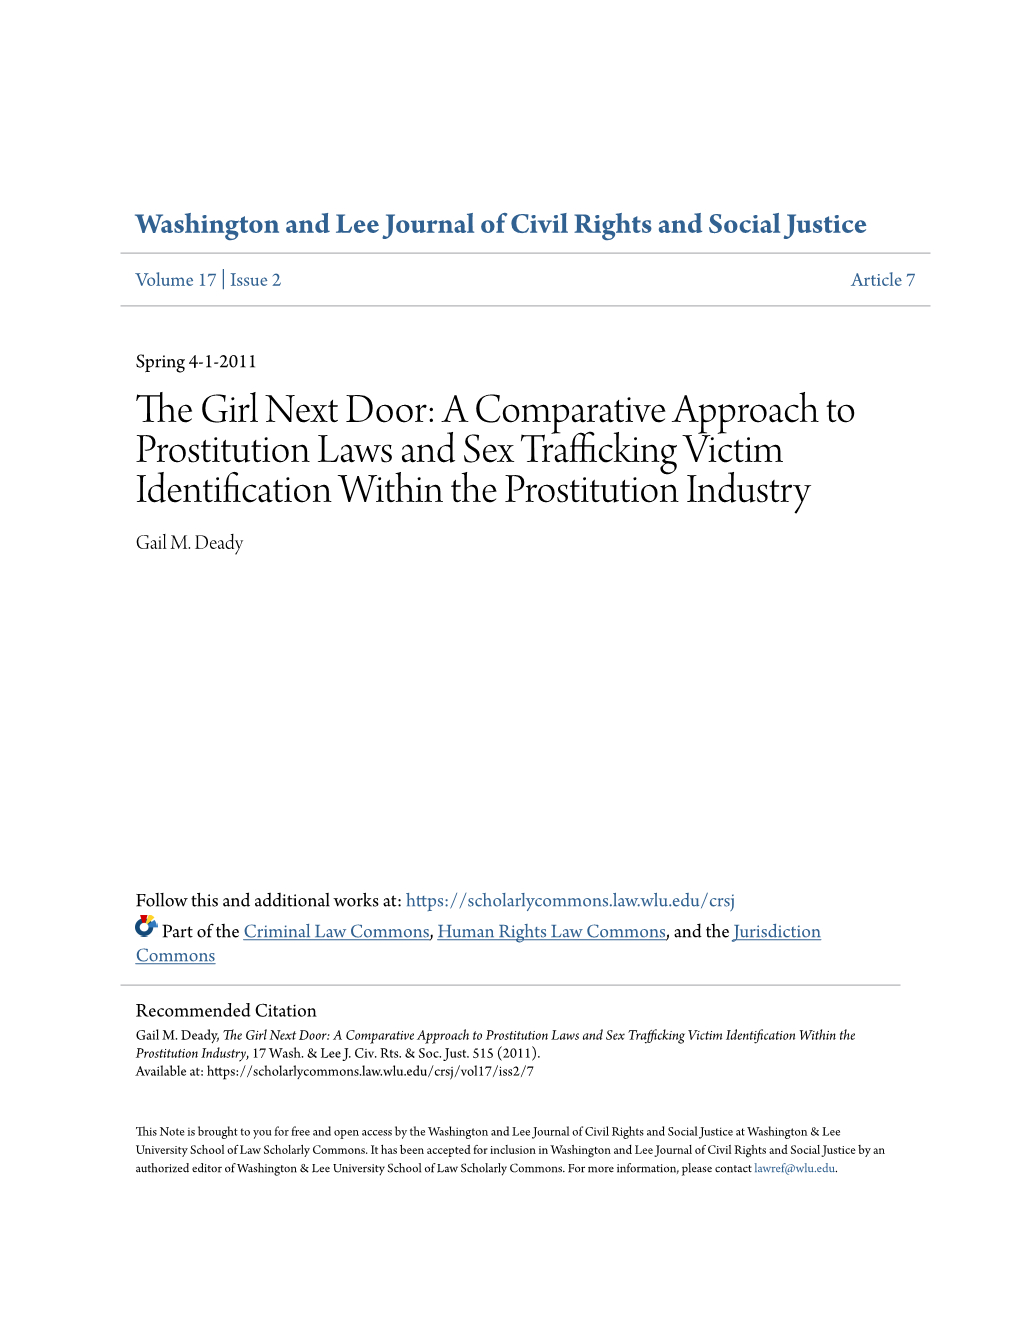 A Comparative Approach to Prostitution Laws and Sex Trafficking Victim Identification Within the Prostitution Industry Gail M